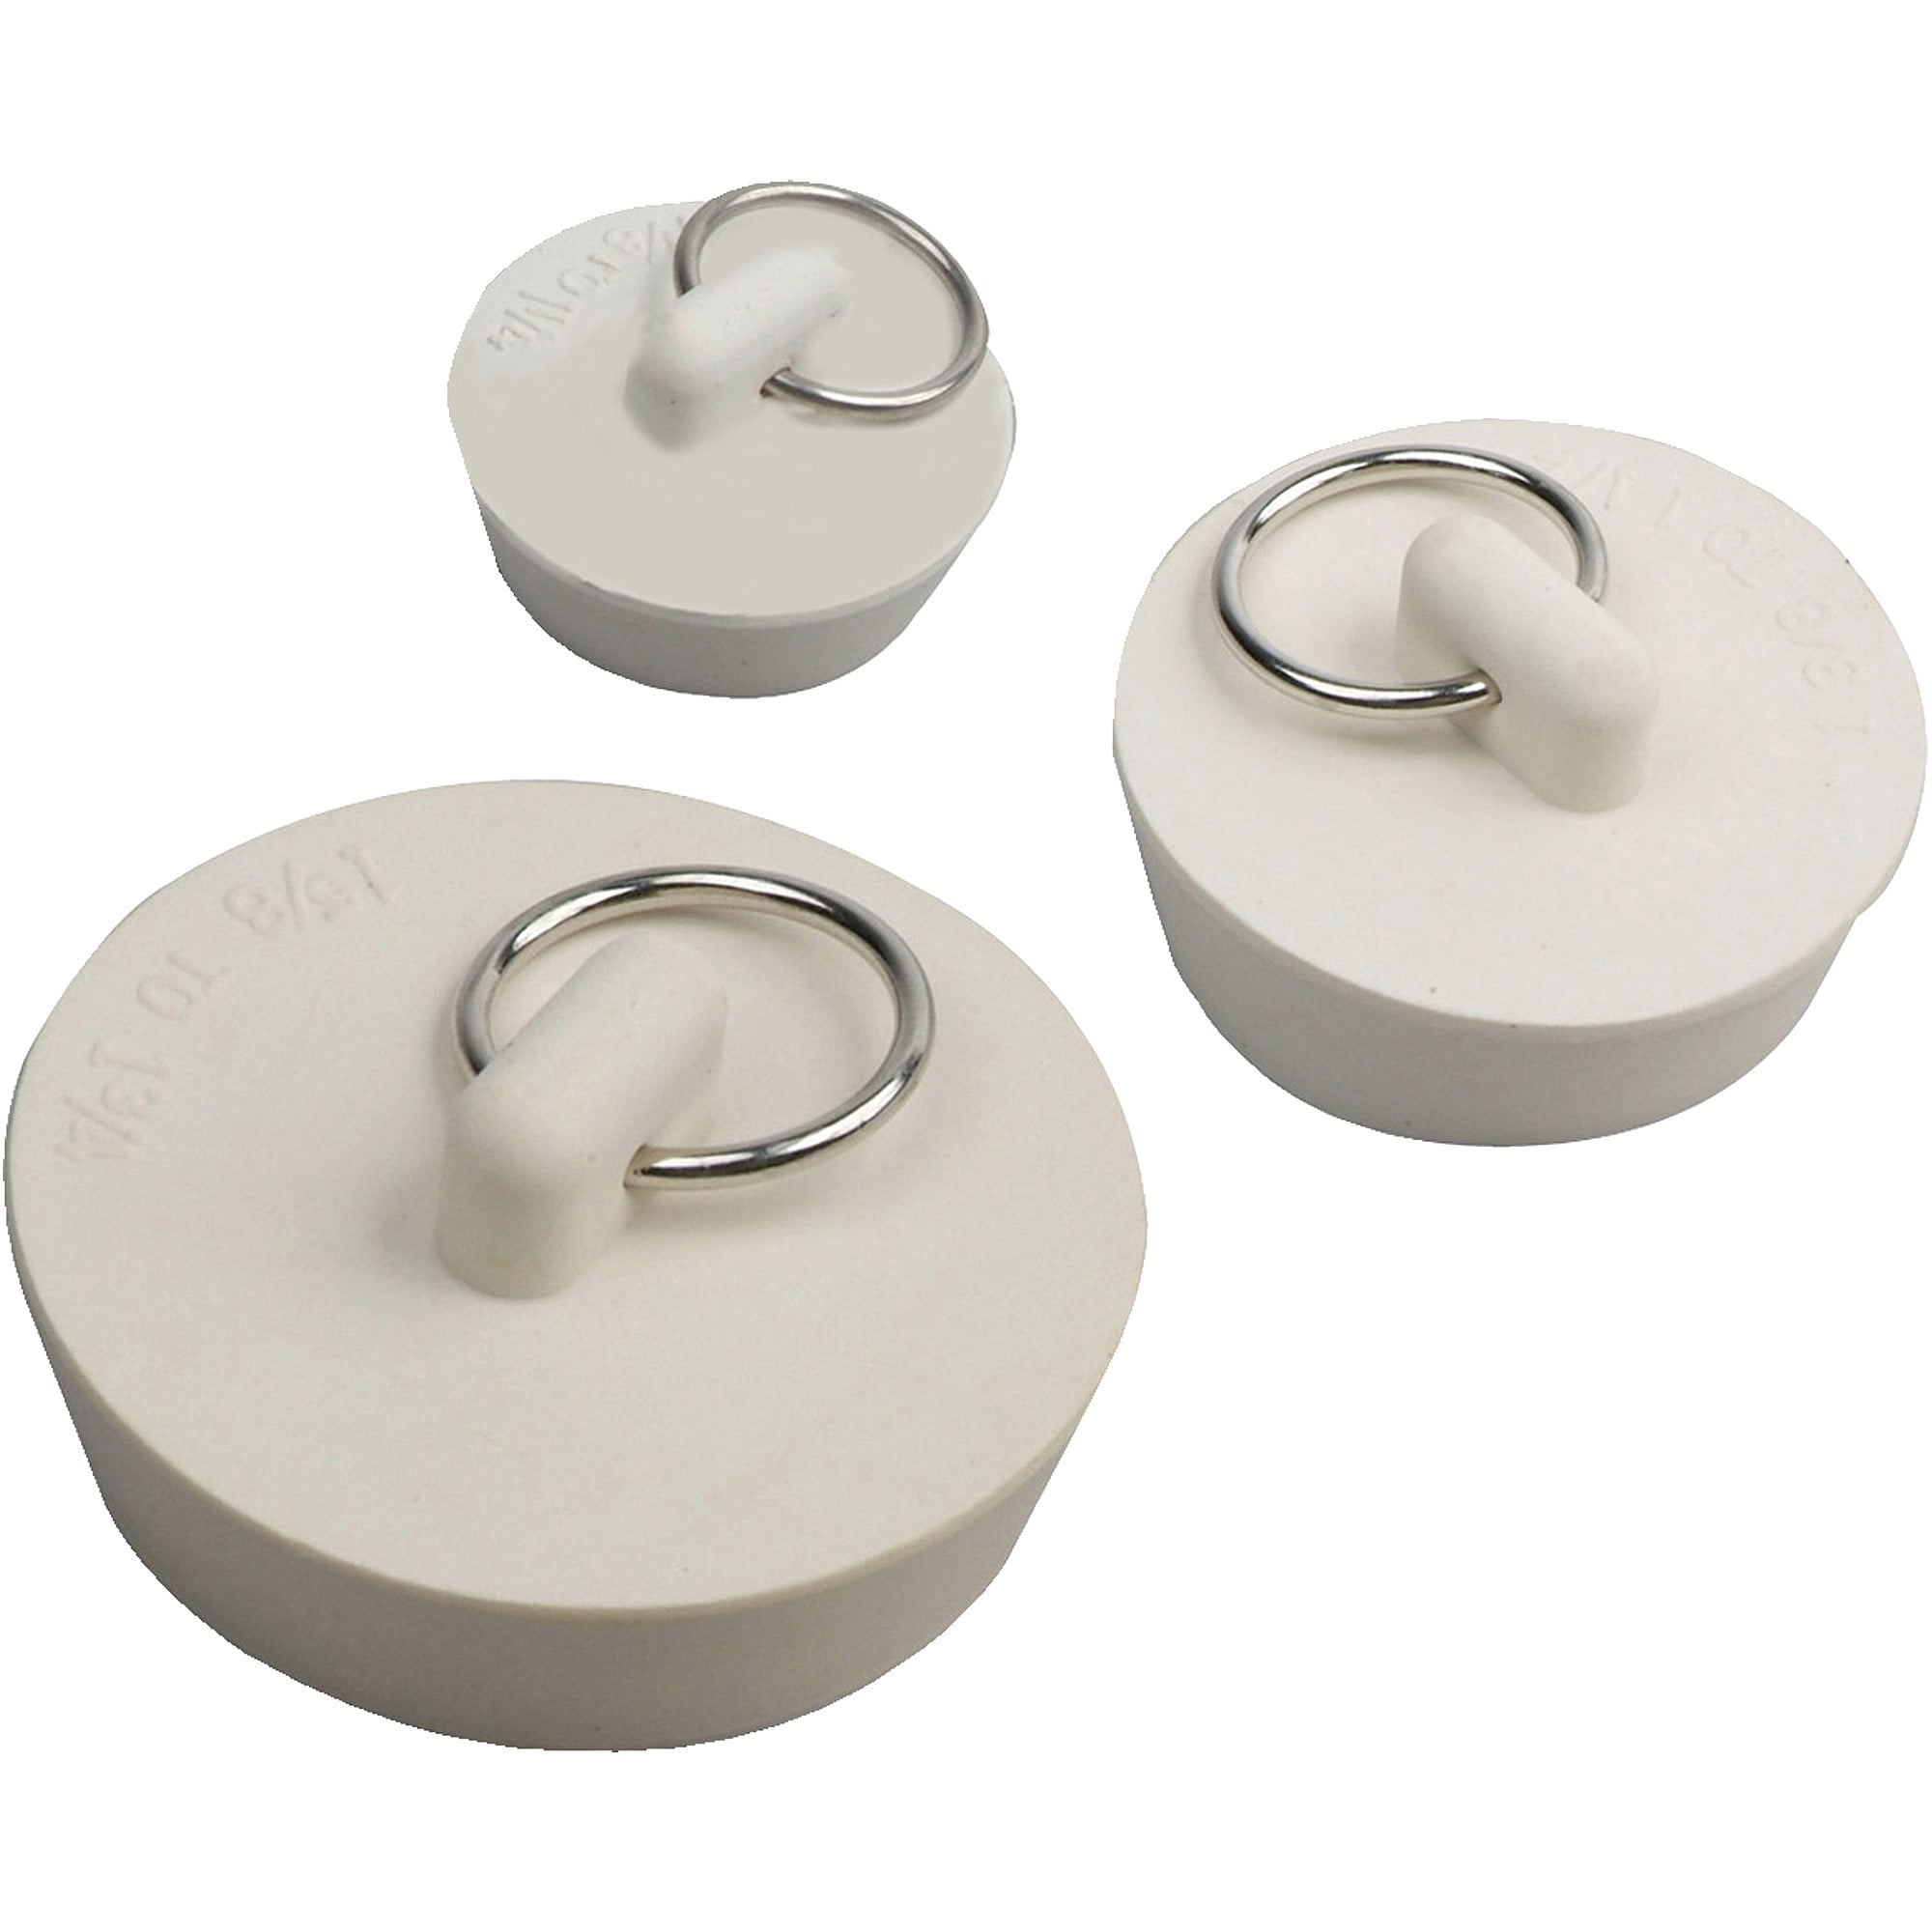 Rless Assorted Rubber Sink Stoppers, 1 2 Inch Bathtub Drain